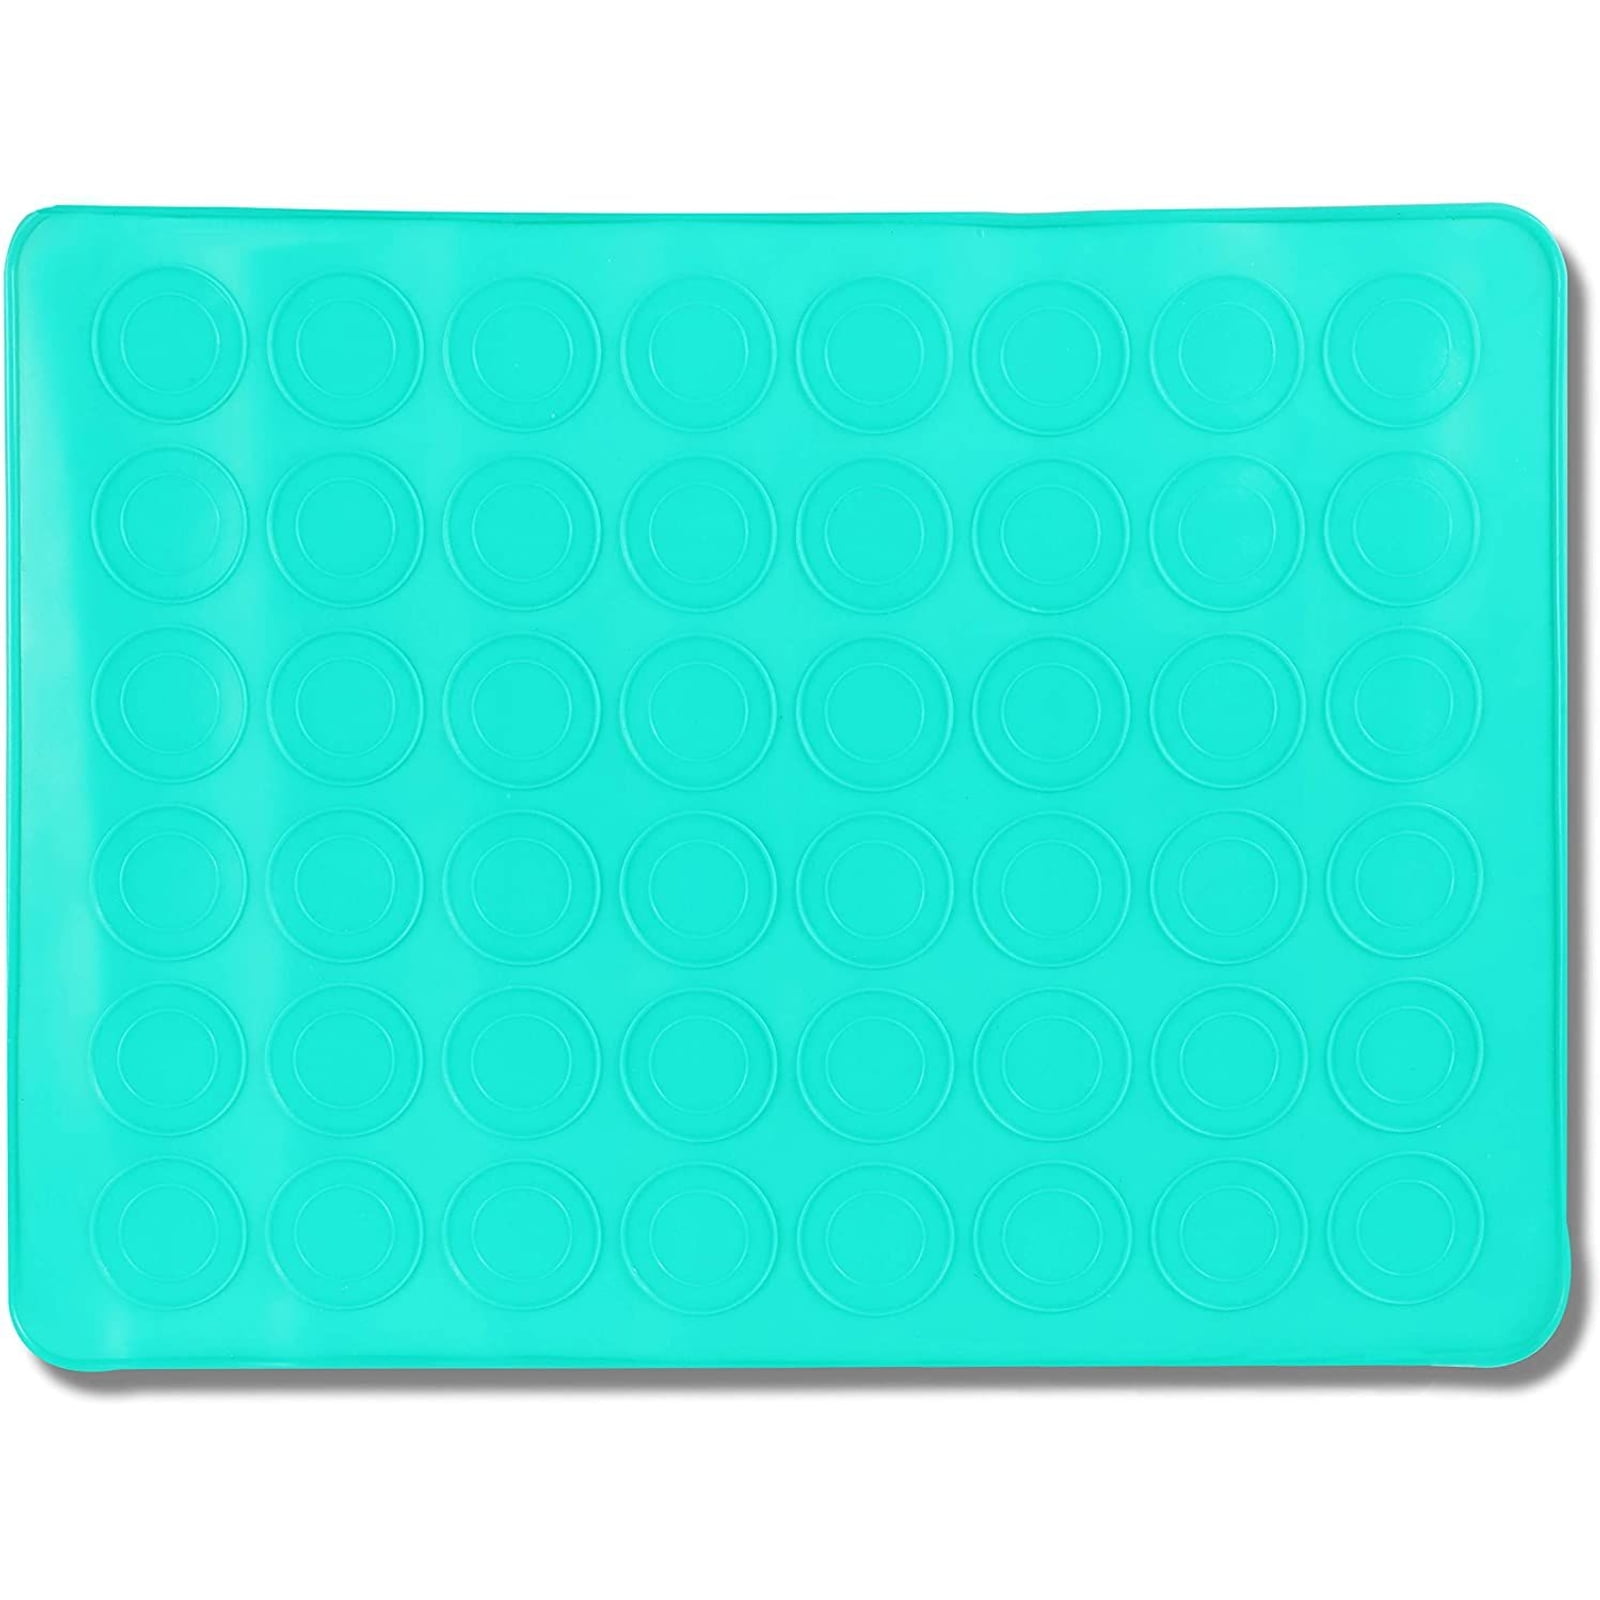 New Silicone Baking Pastry Mat Kitchen Bakeware Kitchenware silicon Mat Green 